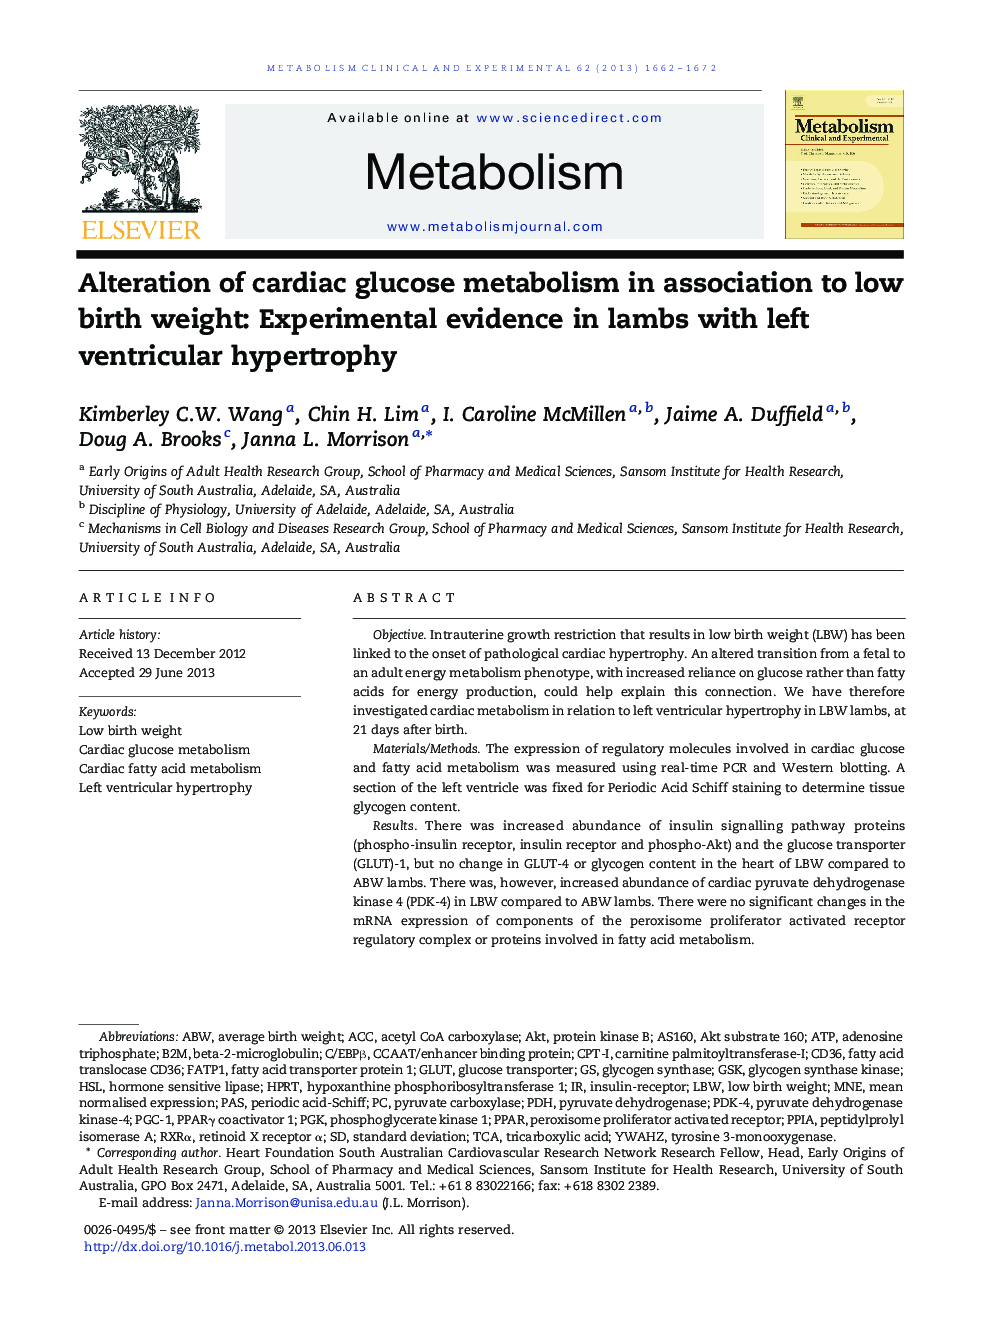 Alteration of cardiac glucose metabolism in association to low birth weight: Experimental evidence in lambs with left ventricular hypertrophy